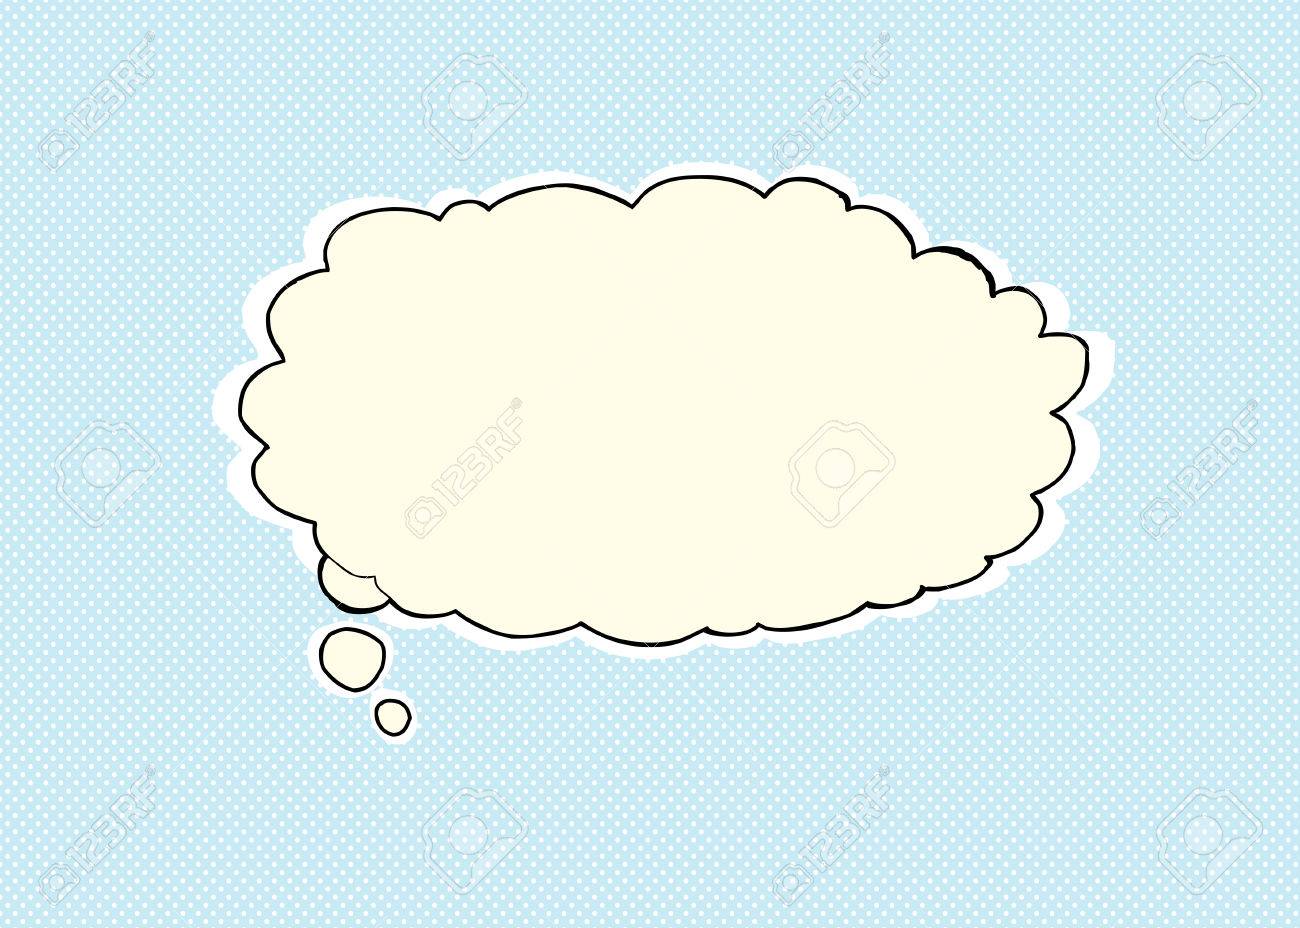 Single Cartoon Blank Thought Bubble Over Blue Background Royalty